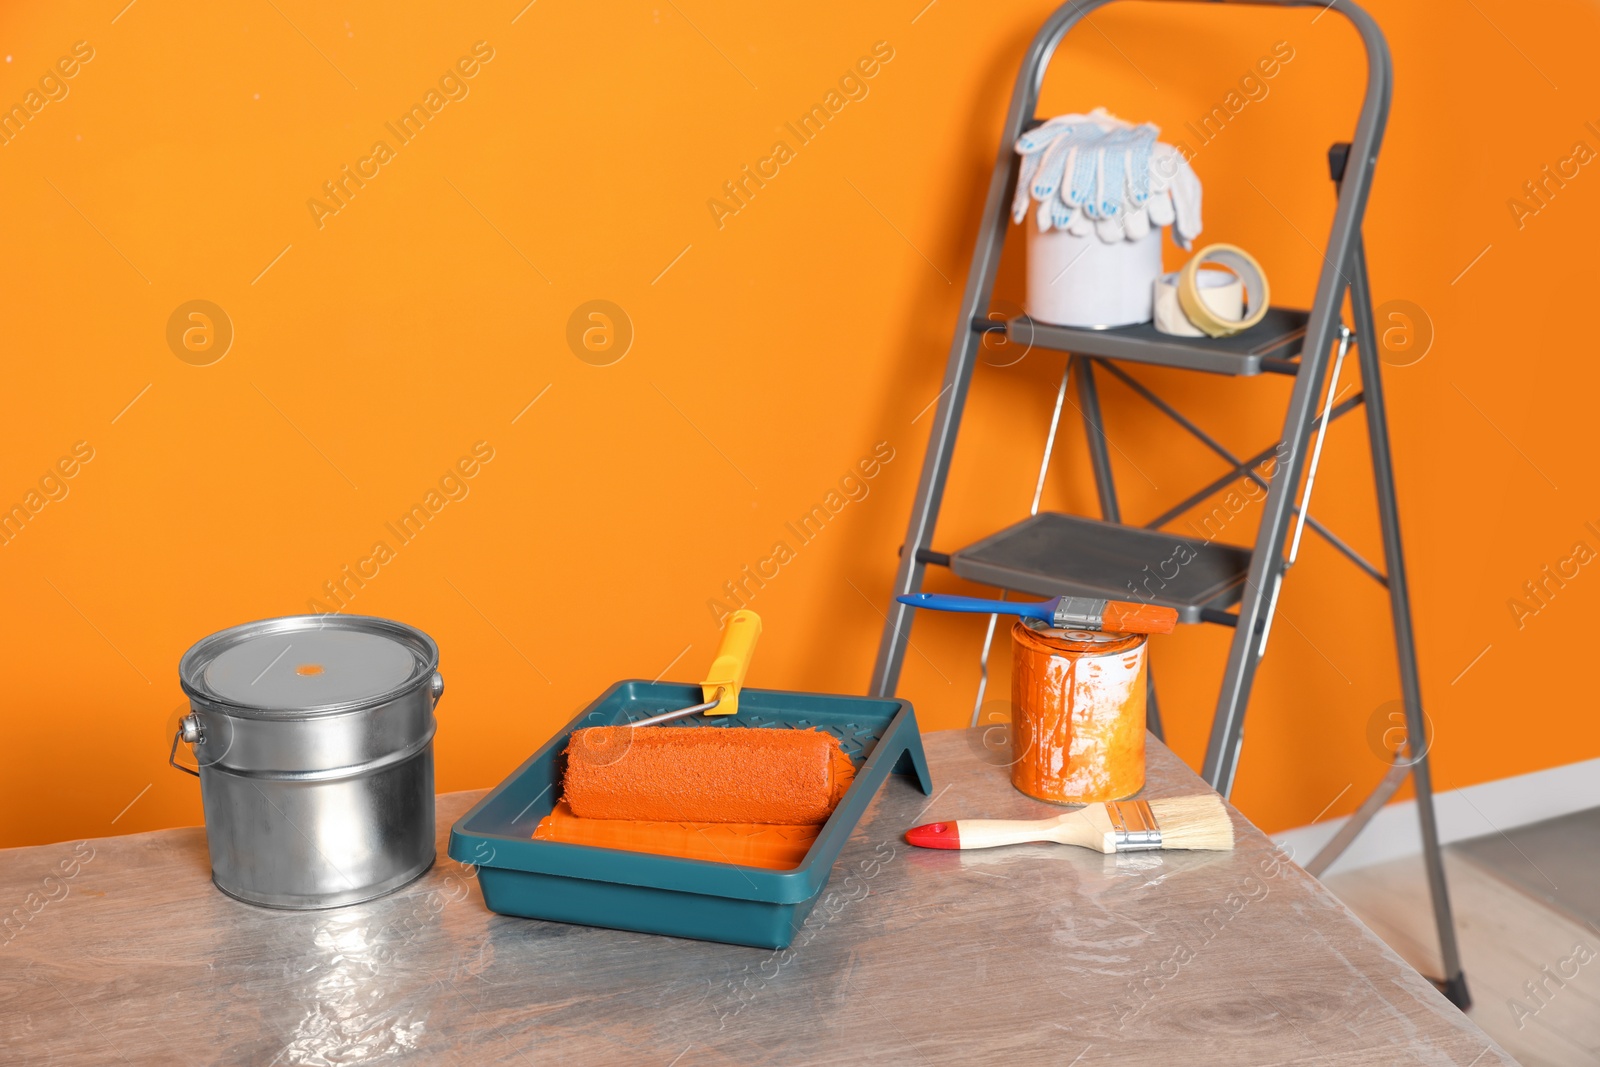 Photo of Tray with orange paint and roller on table